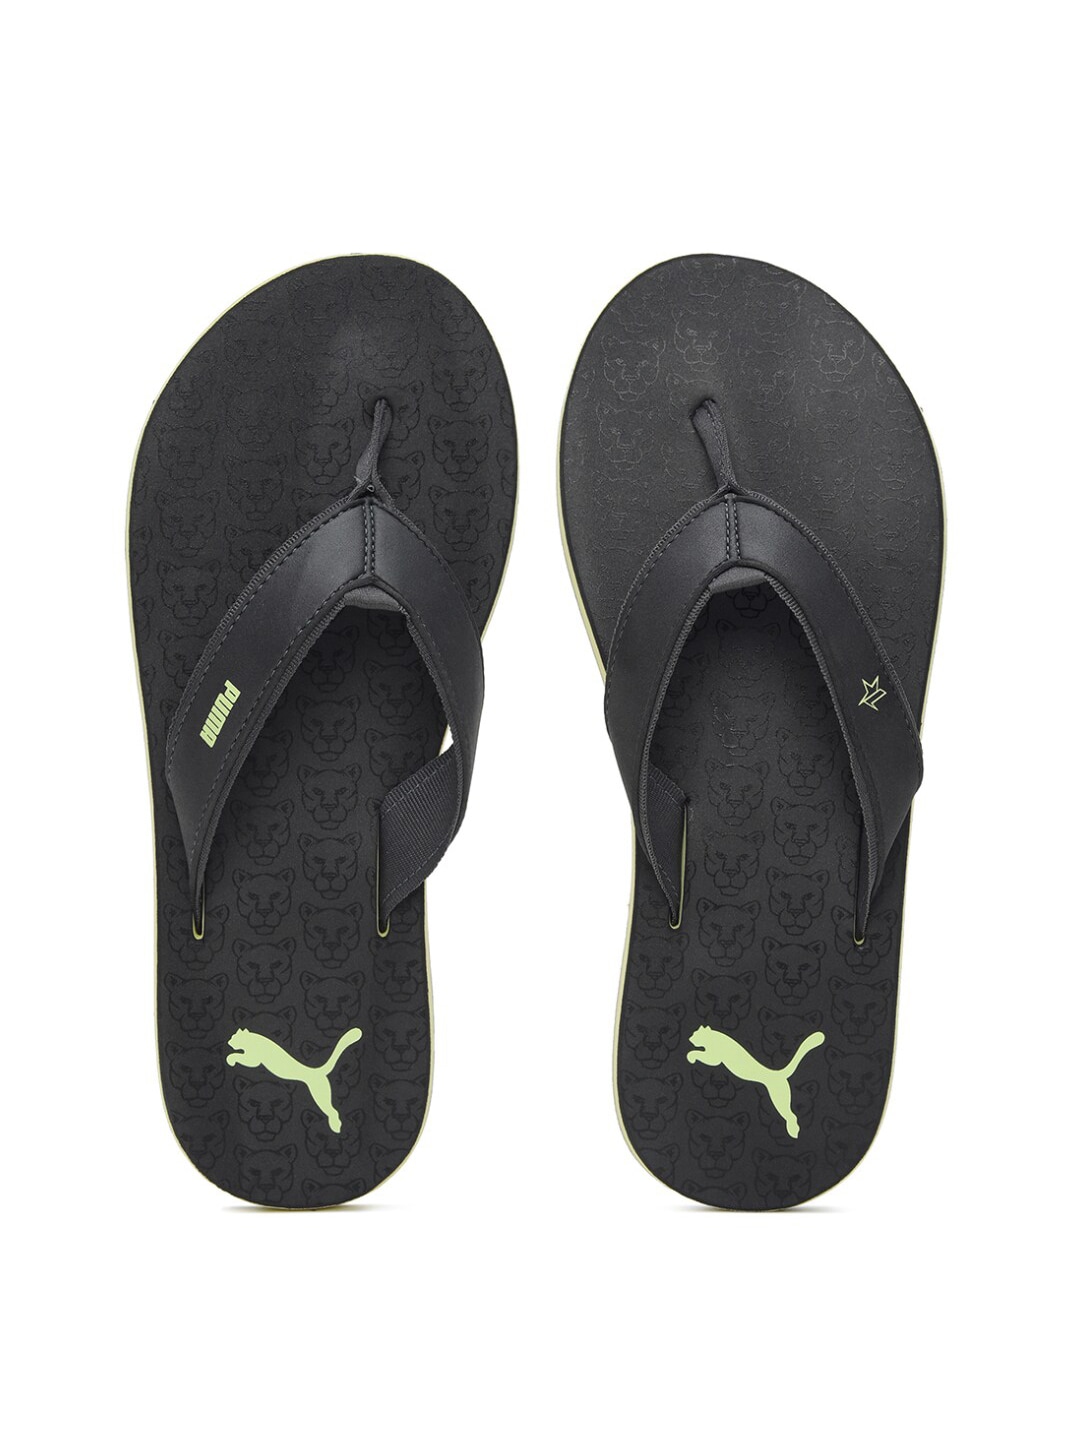 Puma Slippers - Buy Puma Slippers Online in India-saigonsouth.com.vn